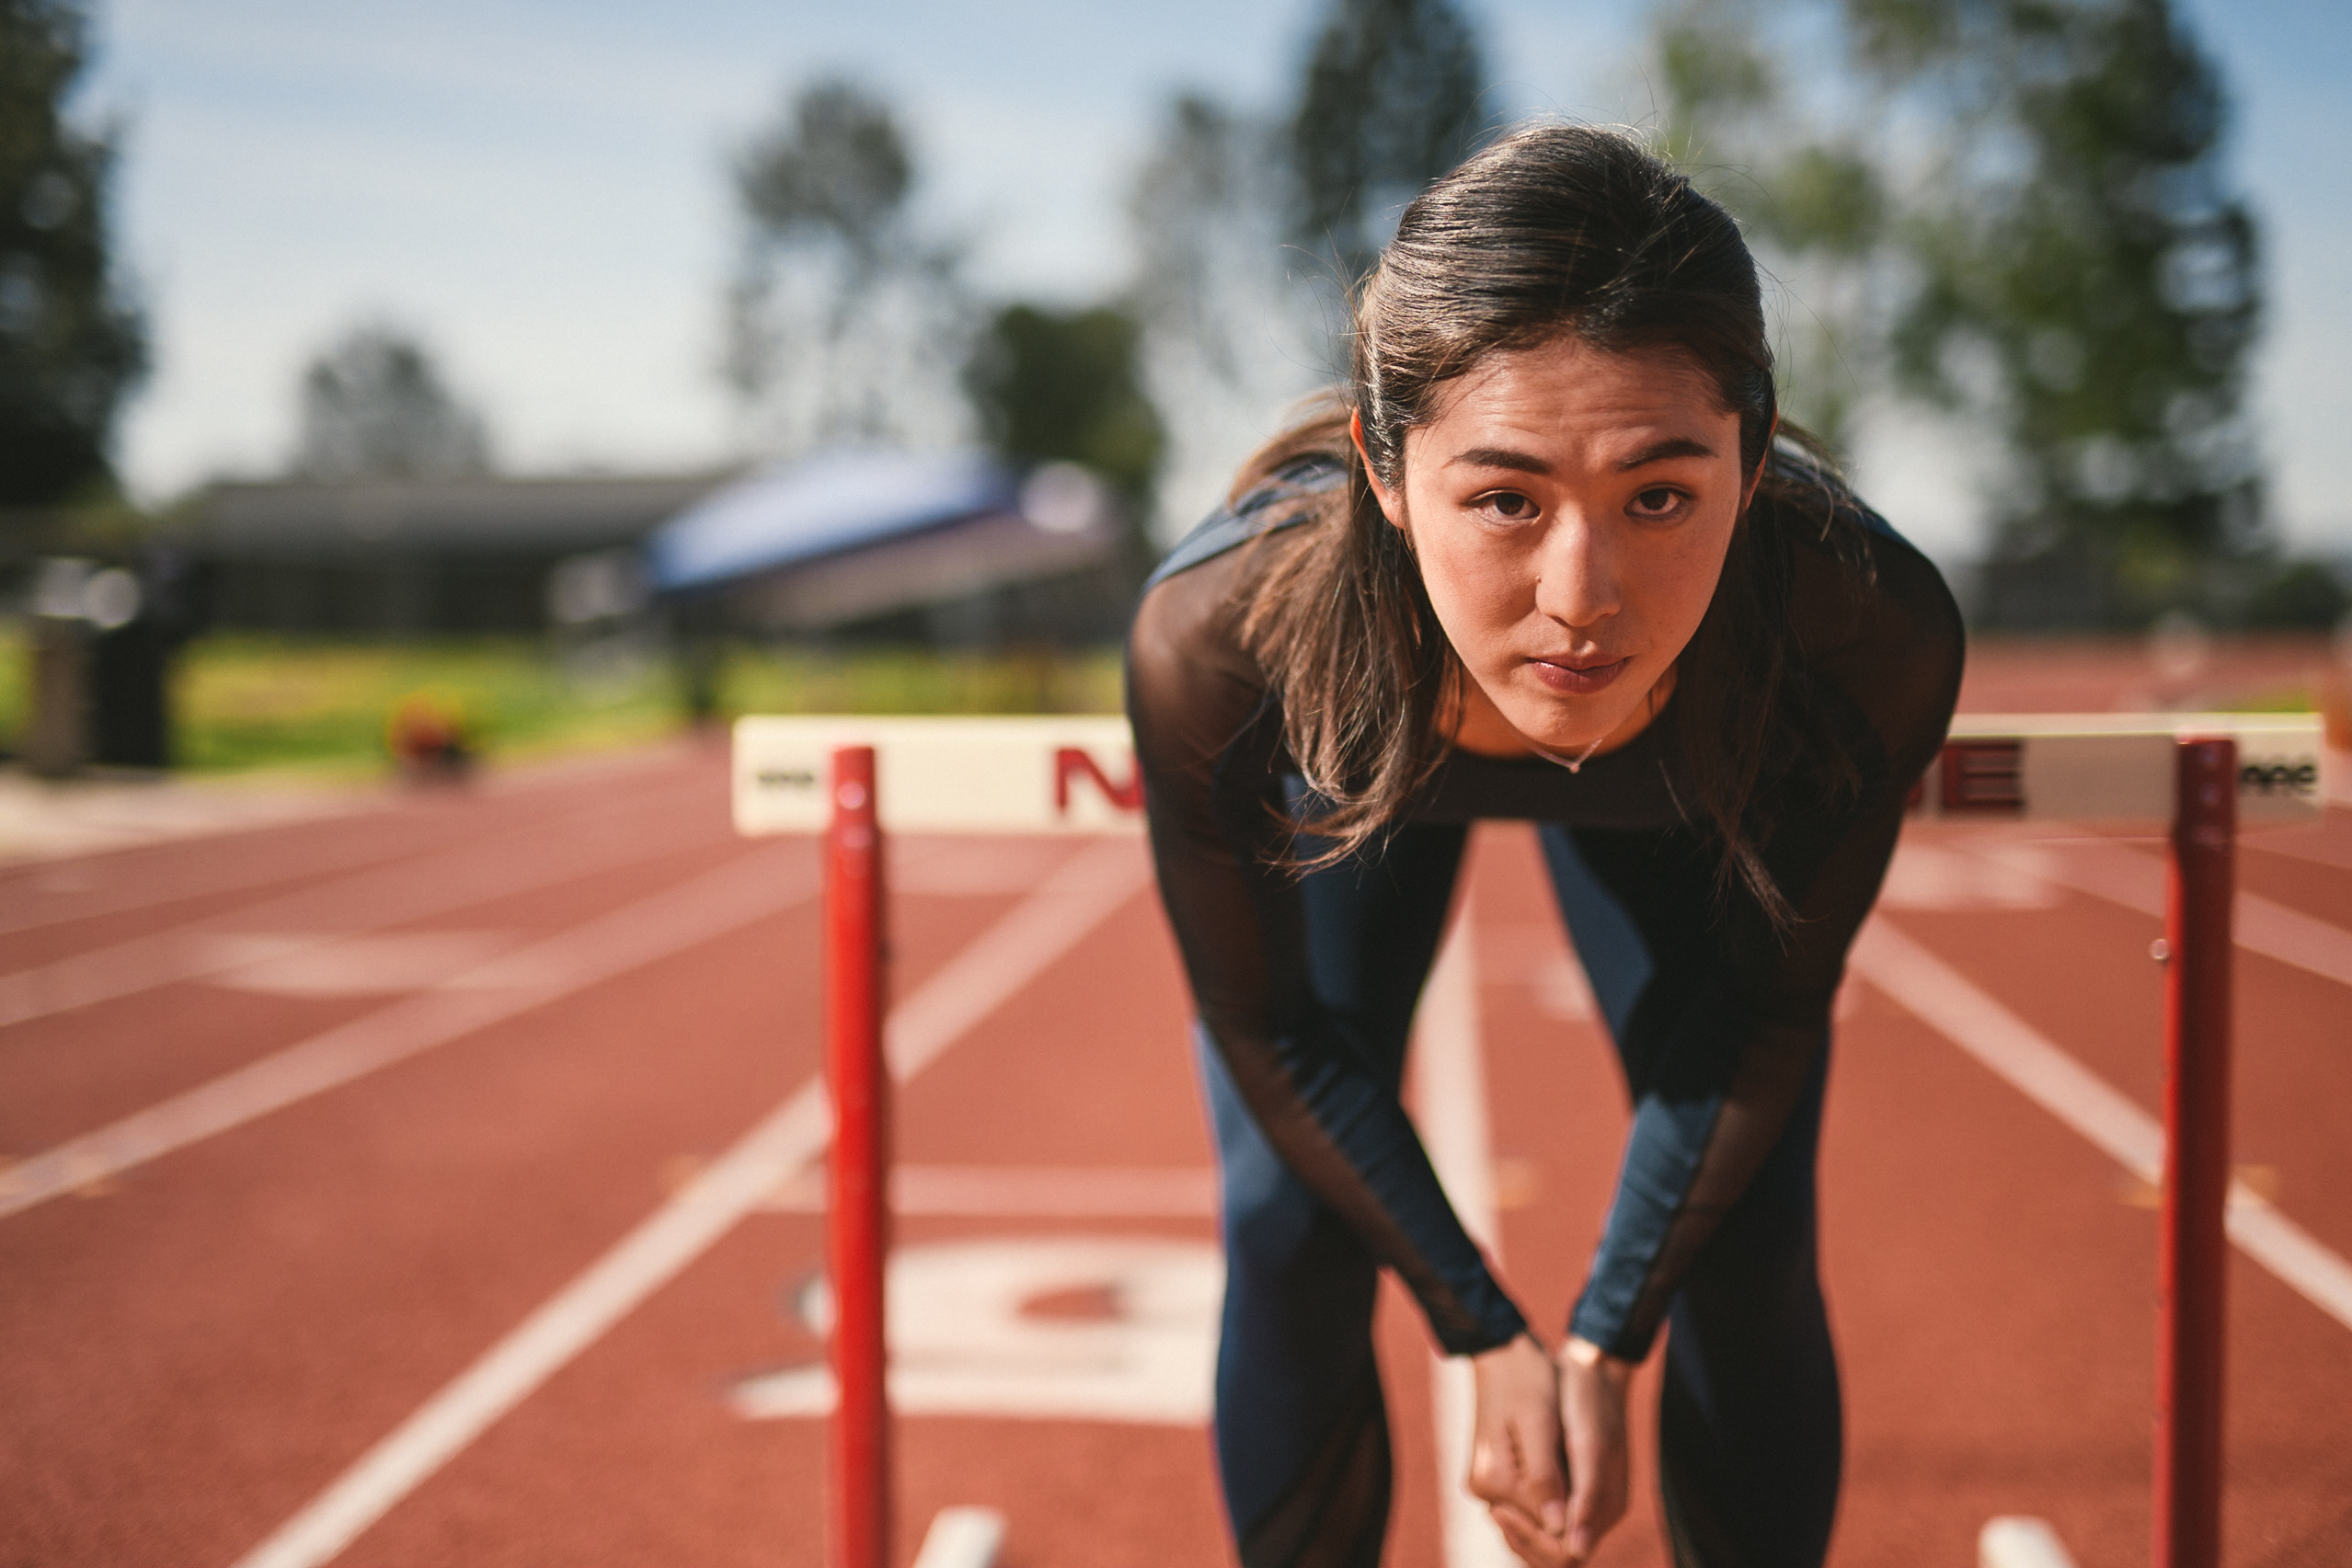 Professional Photography Services to elevate your brand C&I Studios Creative Marketing Kinetix 365 Woman posing for camera on a track field in track outfit bent over in front of a hurdle